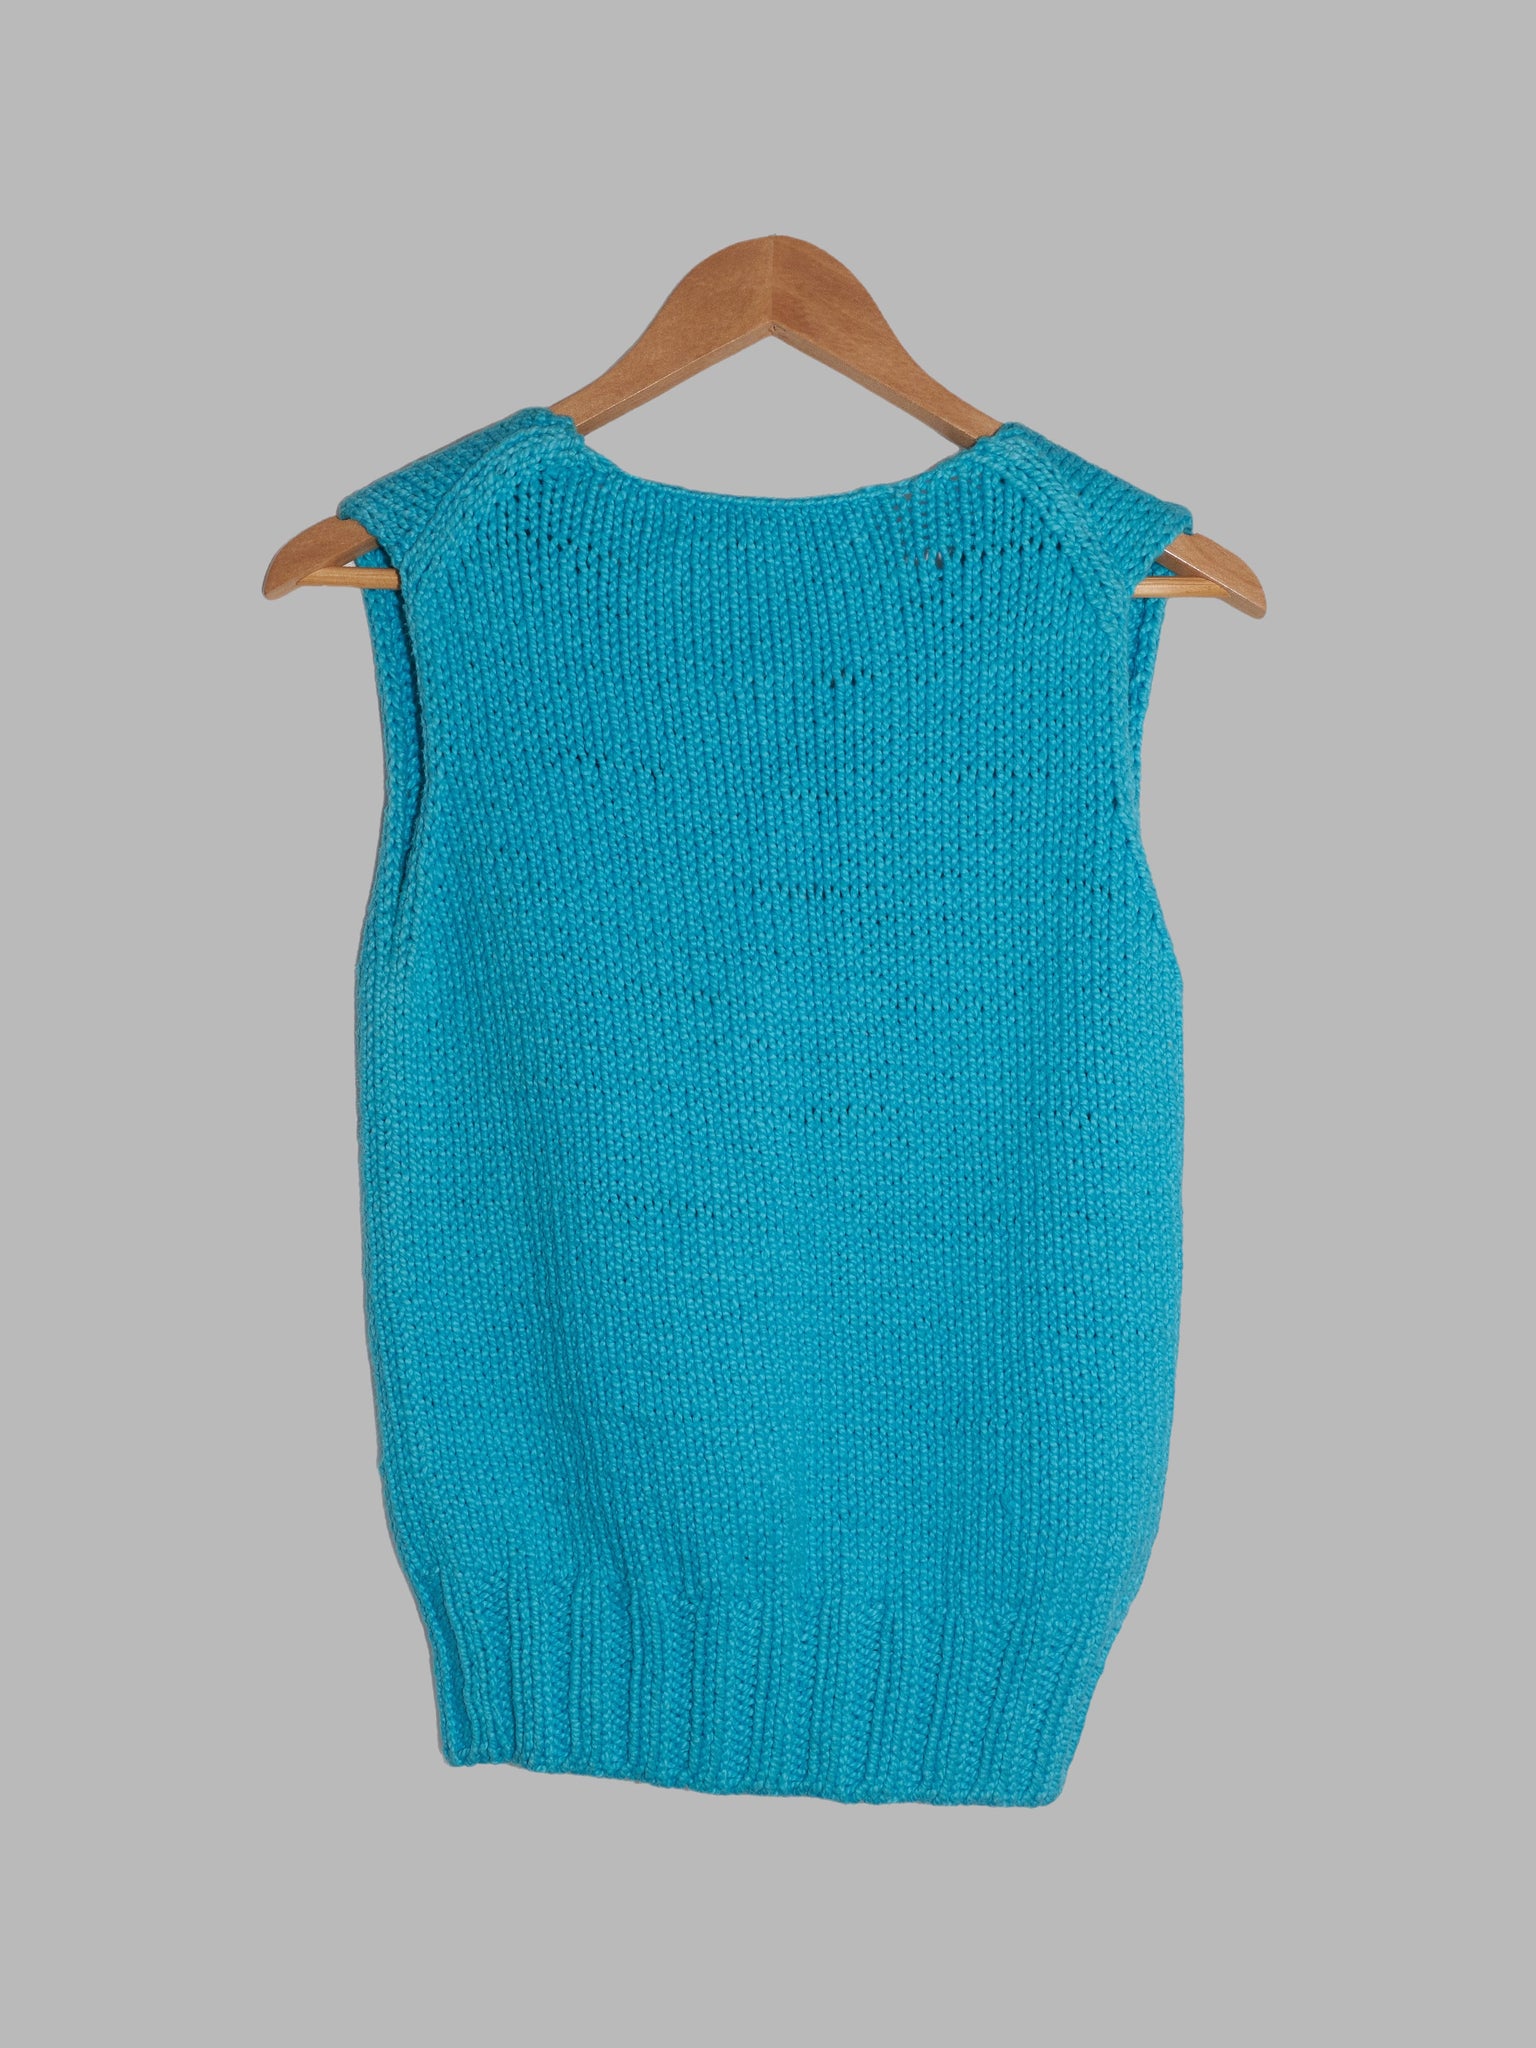 Junya Watanabe Comme des Garcons 1997 thick blue cotton knitted vest